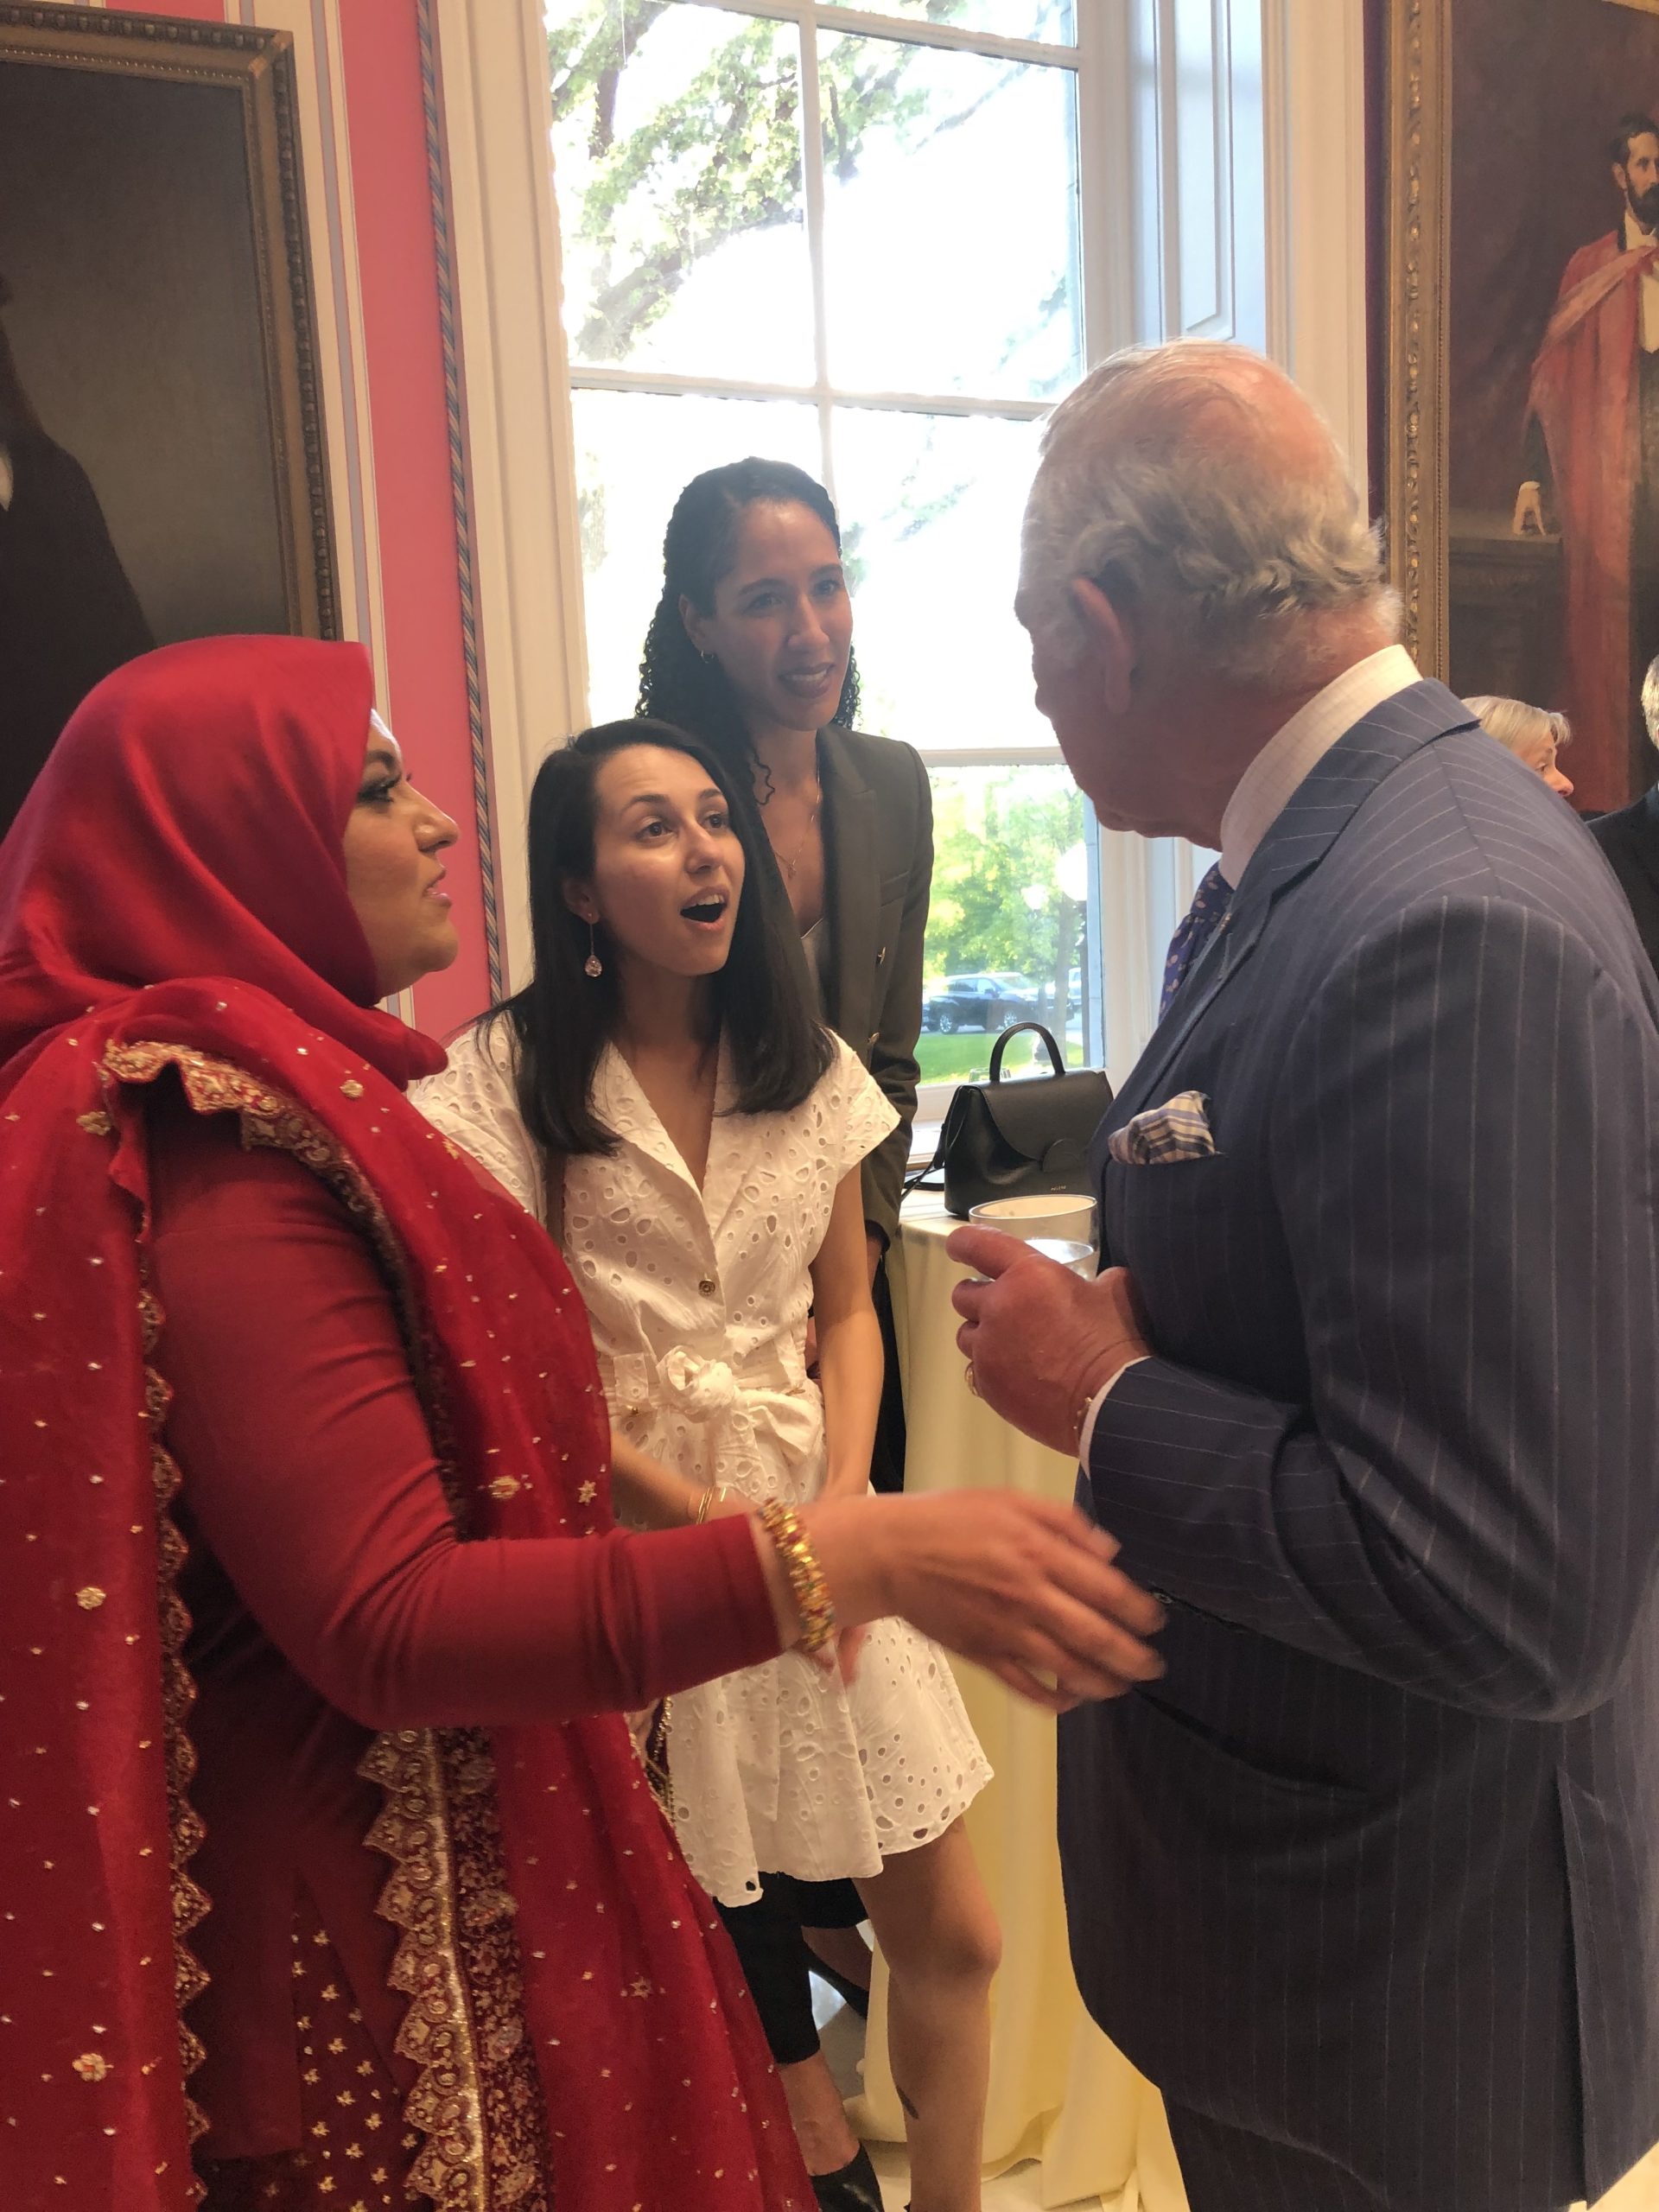 Prince charles with Dr. Ahmad